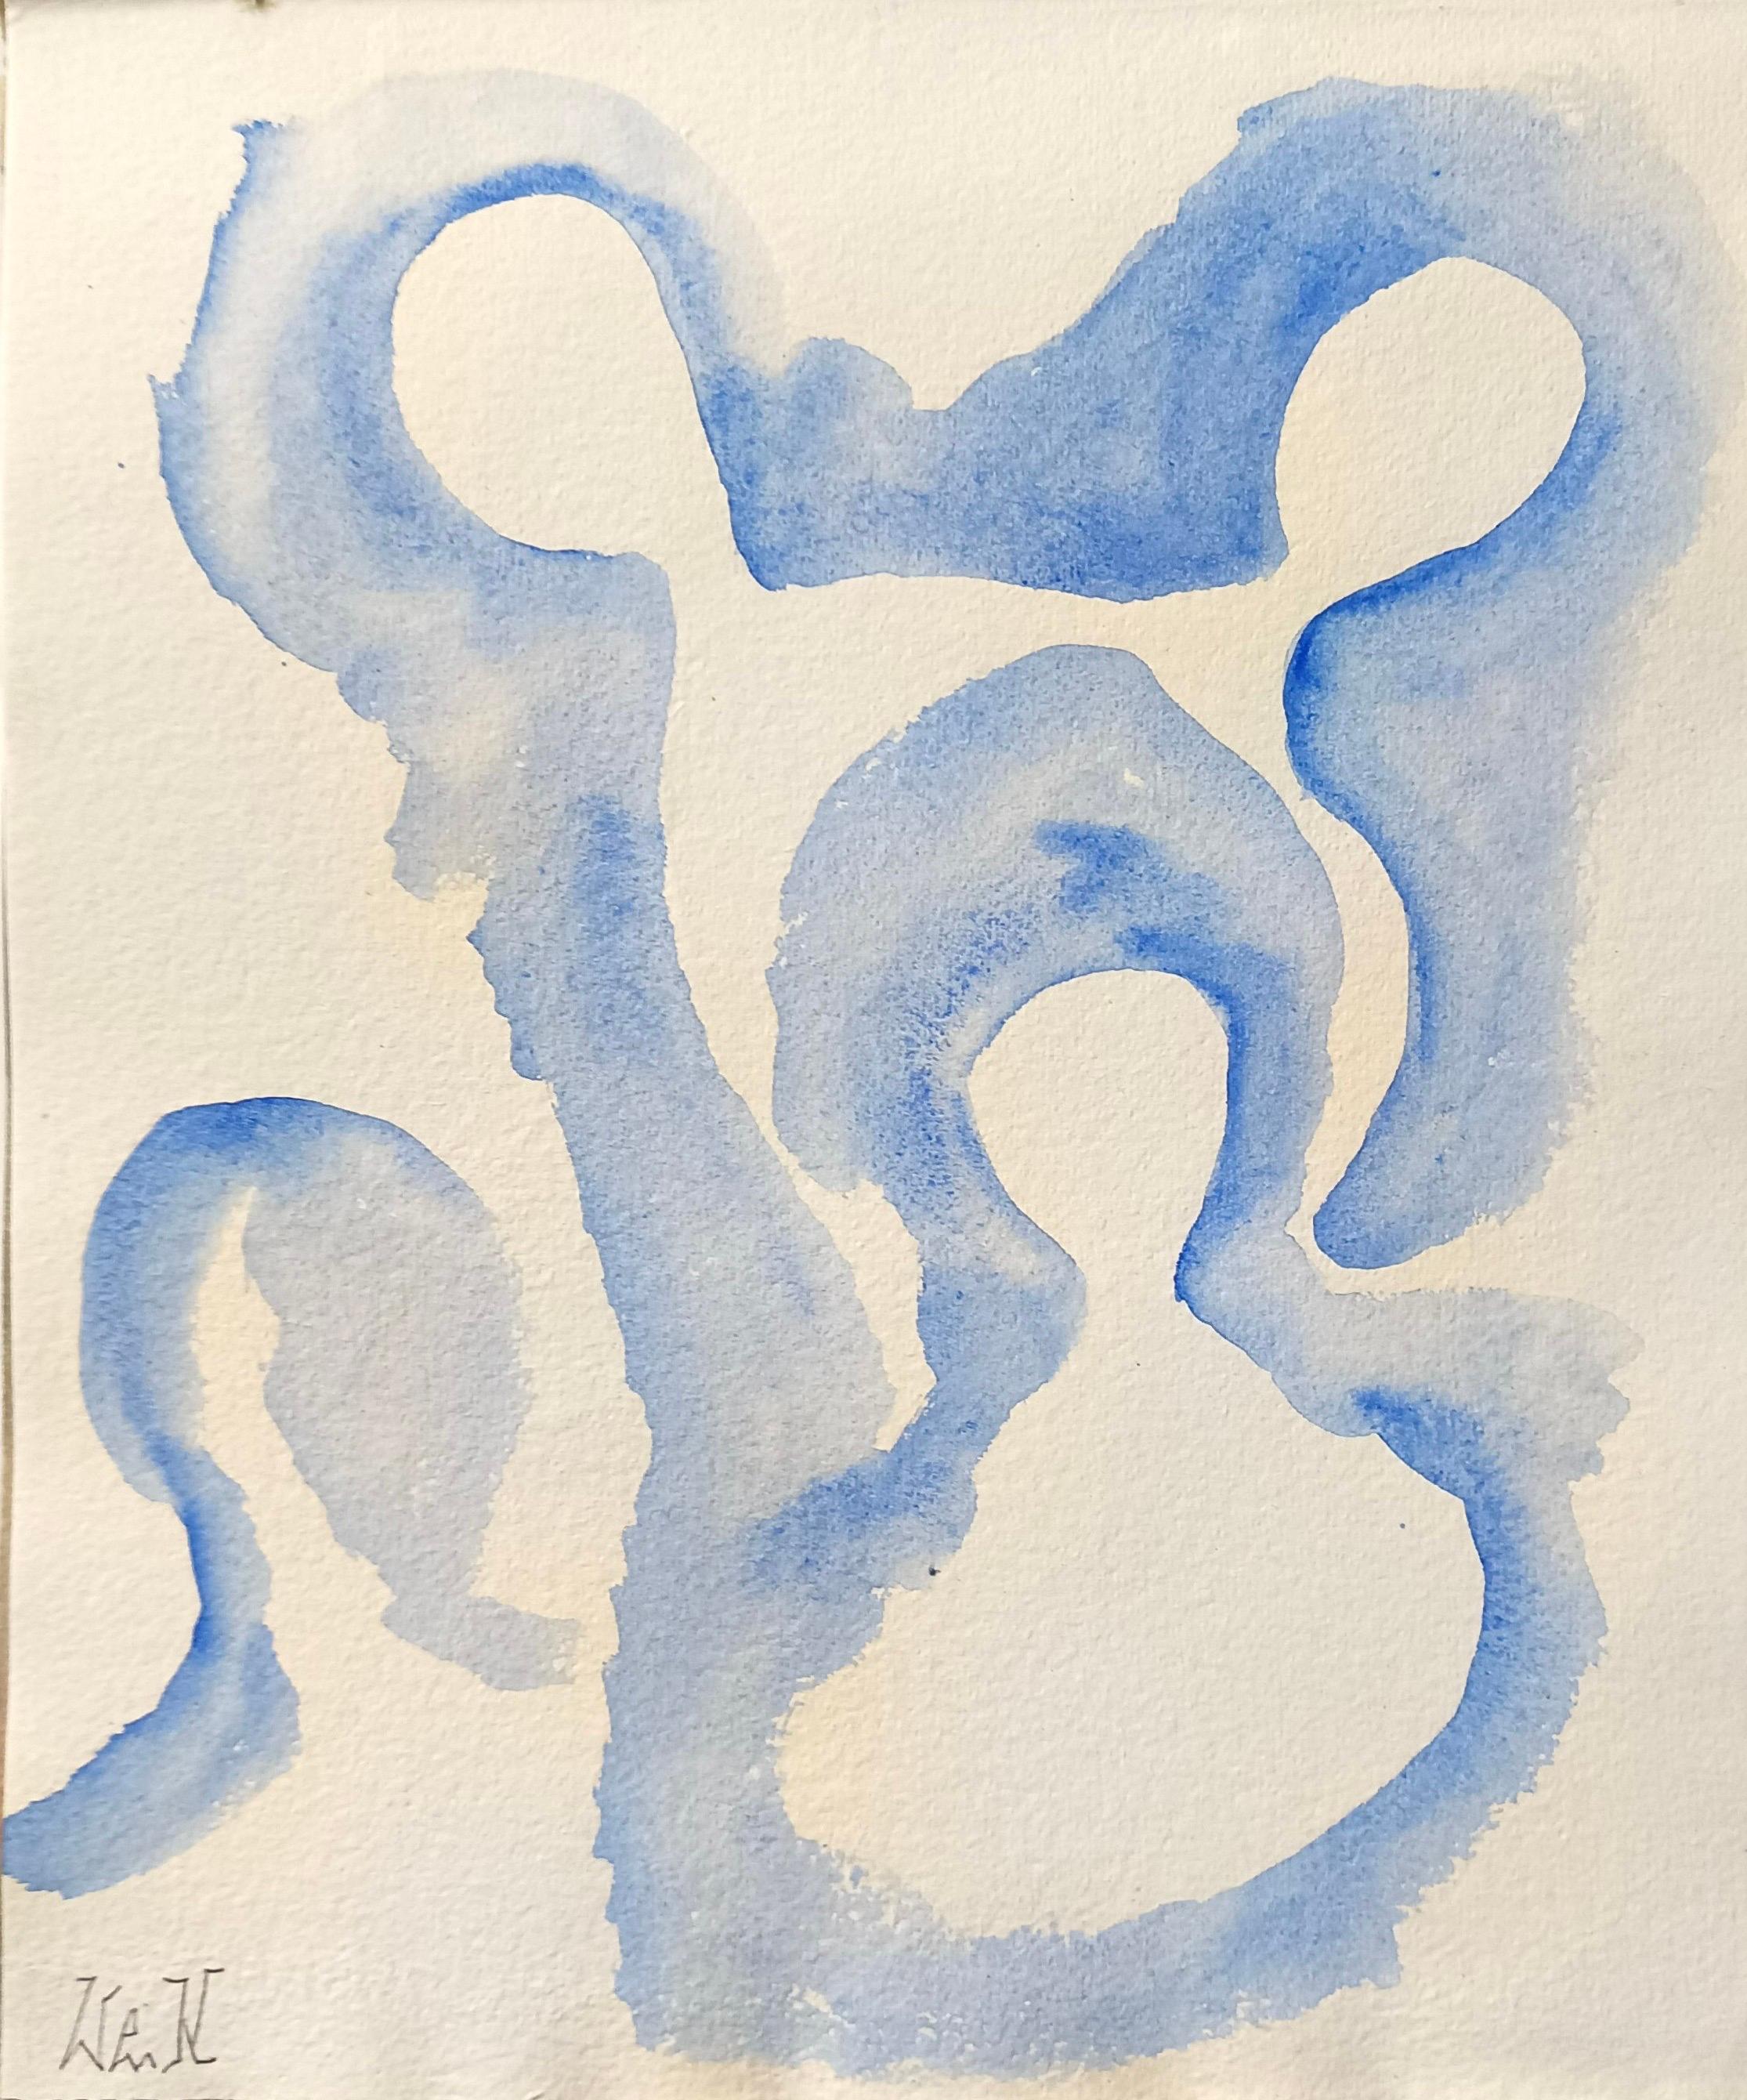 Translated title: "Souls".

Watercolor on high-quality cotton paper, which is handmade in Italy.
This is part of an album. 
The price refers to the single drawing. 